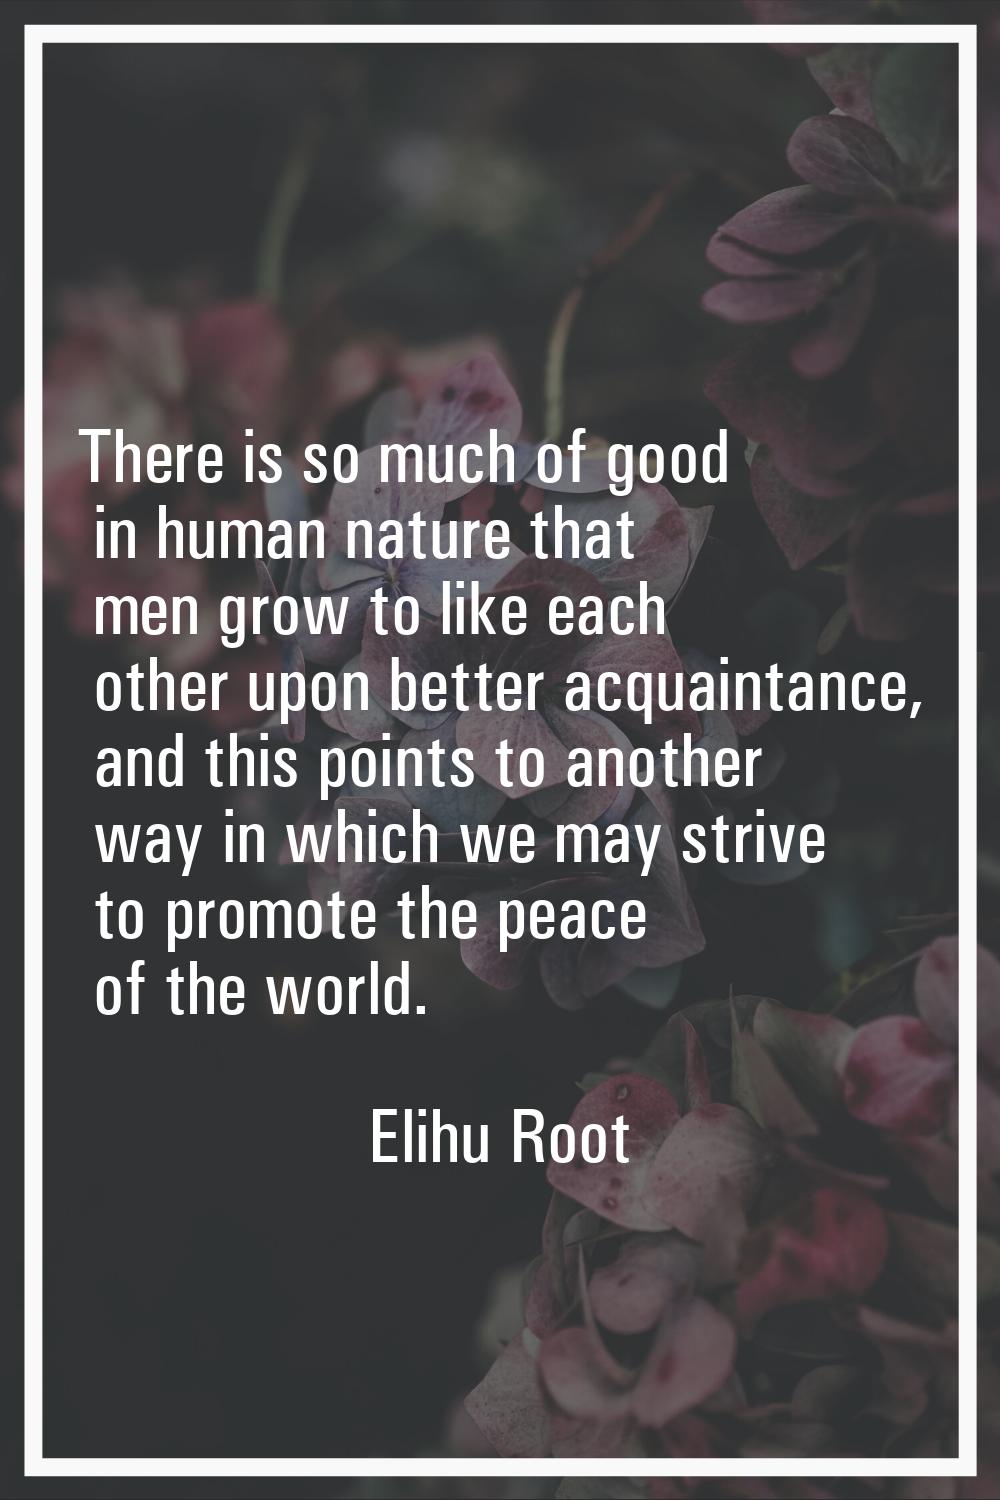 There is so much of good in human nature that men grow to like each other upon better acquaintance,